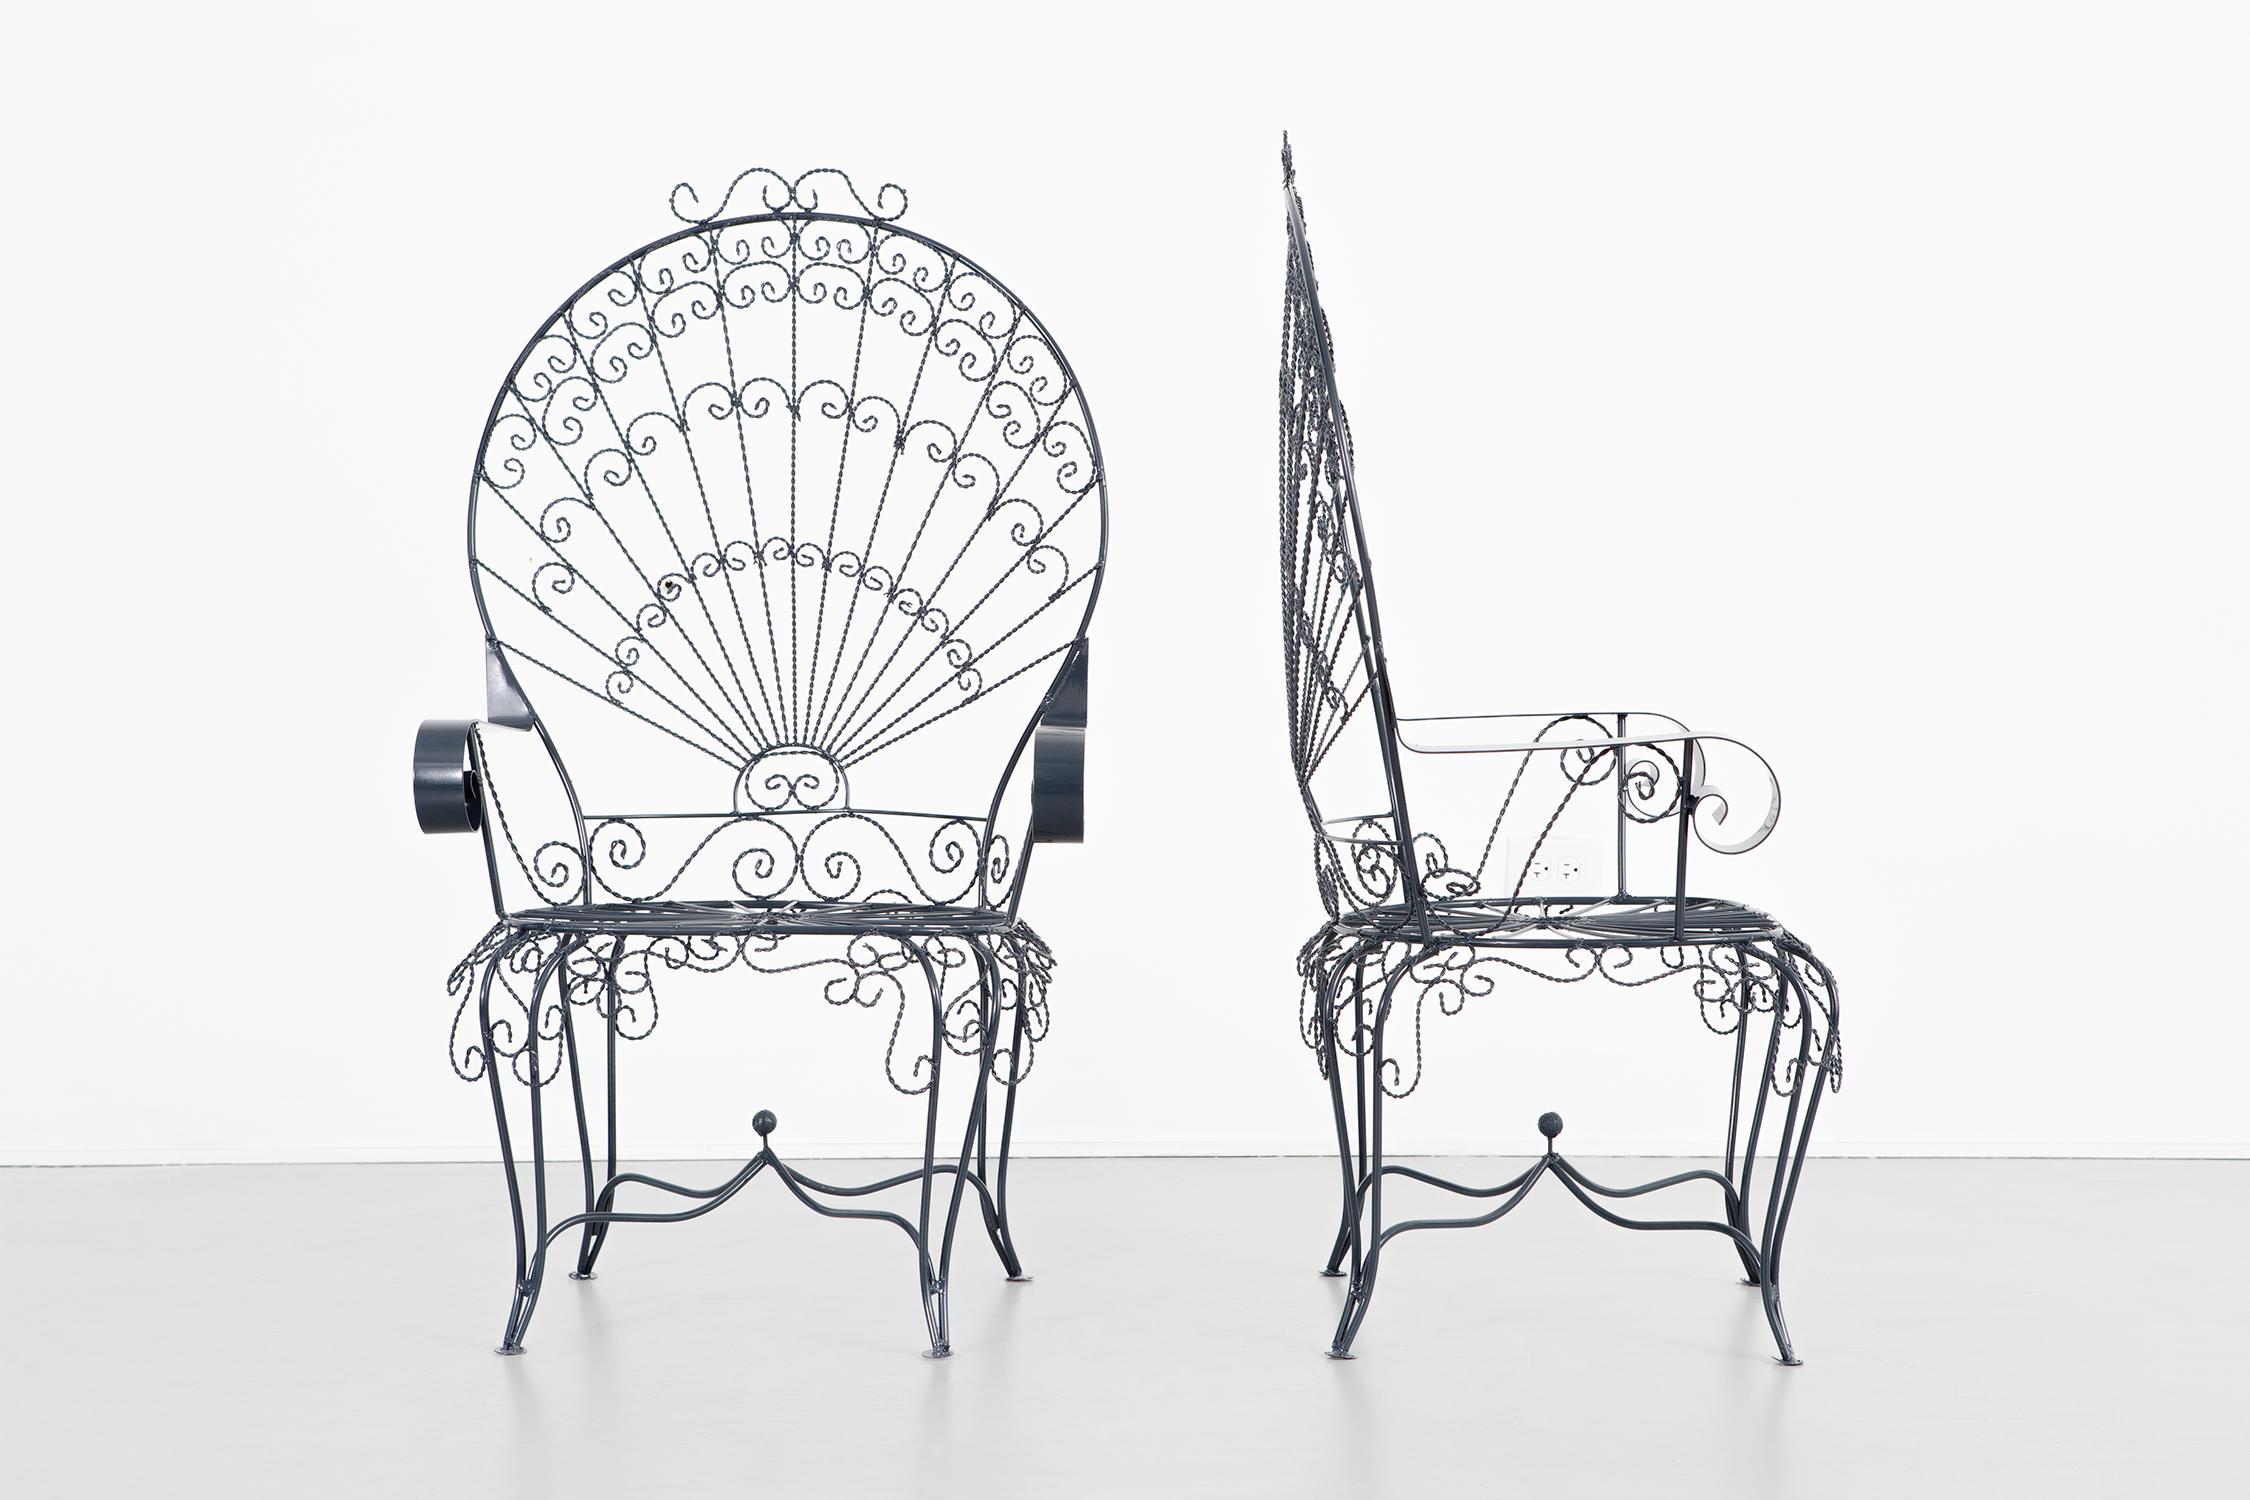 Set of two Peacock chairs

designed by John Salterini

USA, circa 1930s

wrought iron

freshly powder coated 

Measures: 47 ?” H x 27” W x 21 ½” D x seat 16 ½” H.

color sample of powder coating available upon request